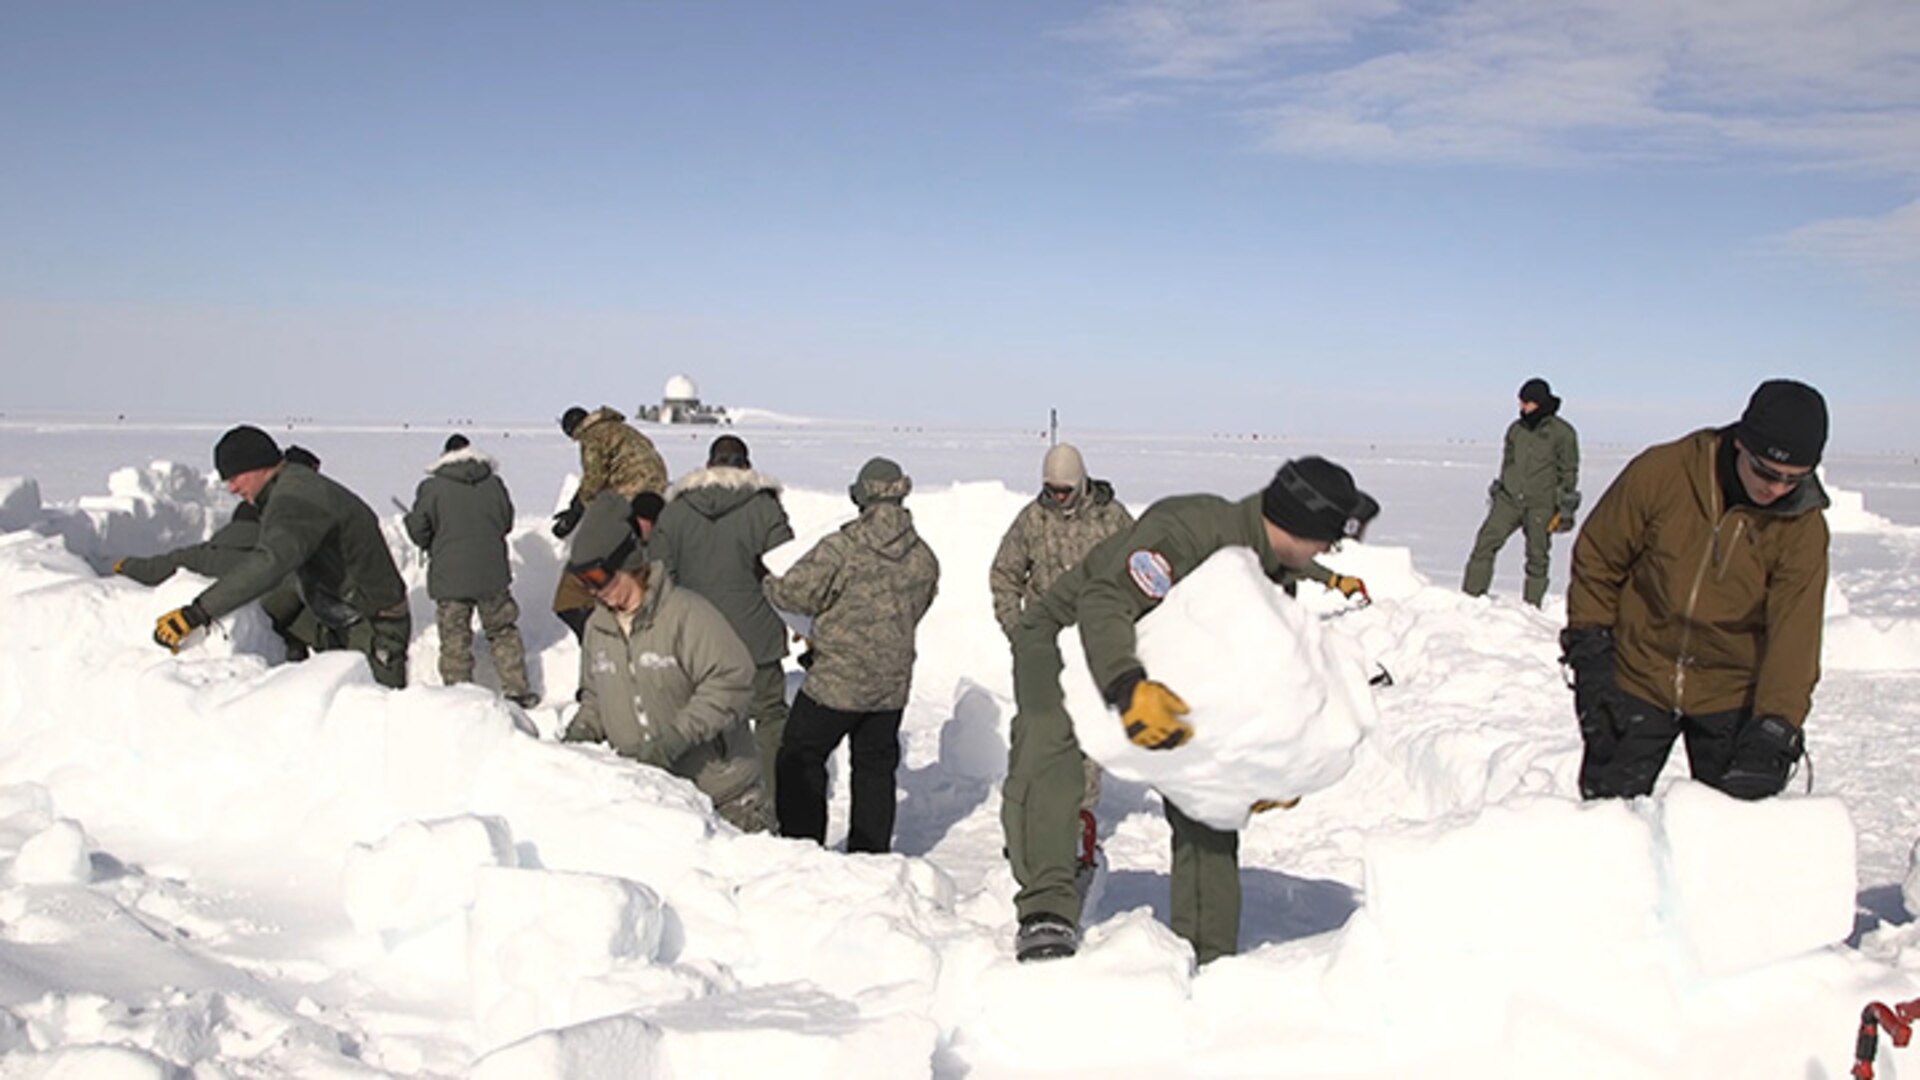 Students build a shelter during barren land arctic survival training, commonly known as “Kool School” on June 9, 2018 at Raven Camp, Greenland. This year, 25 Airmen from the New York Air National Guard’s 109th Airlift Wing in Scotia, New York, completed the training, learning basic arctic survival skills.